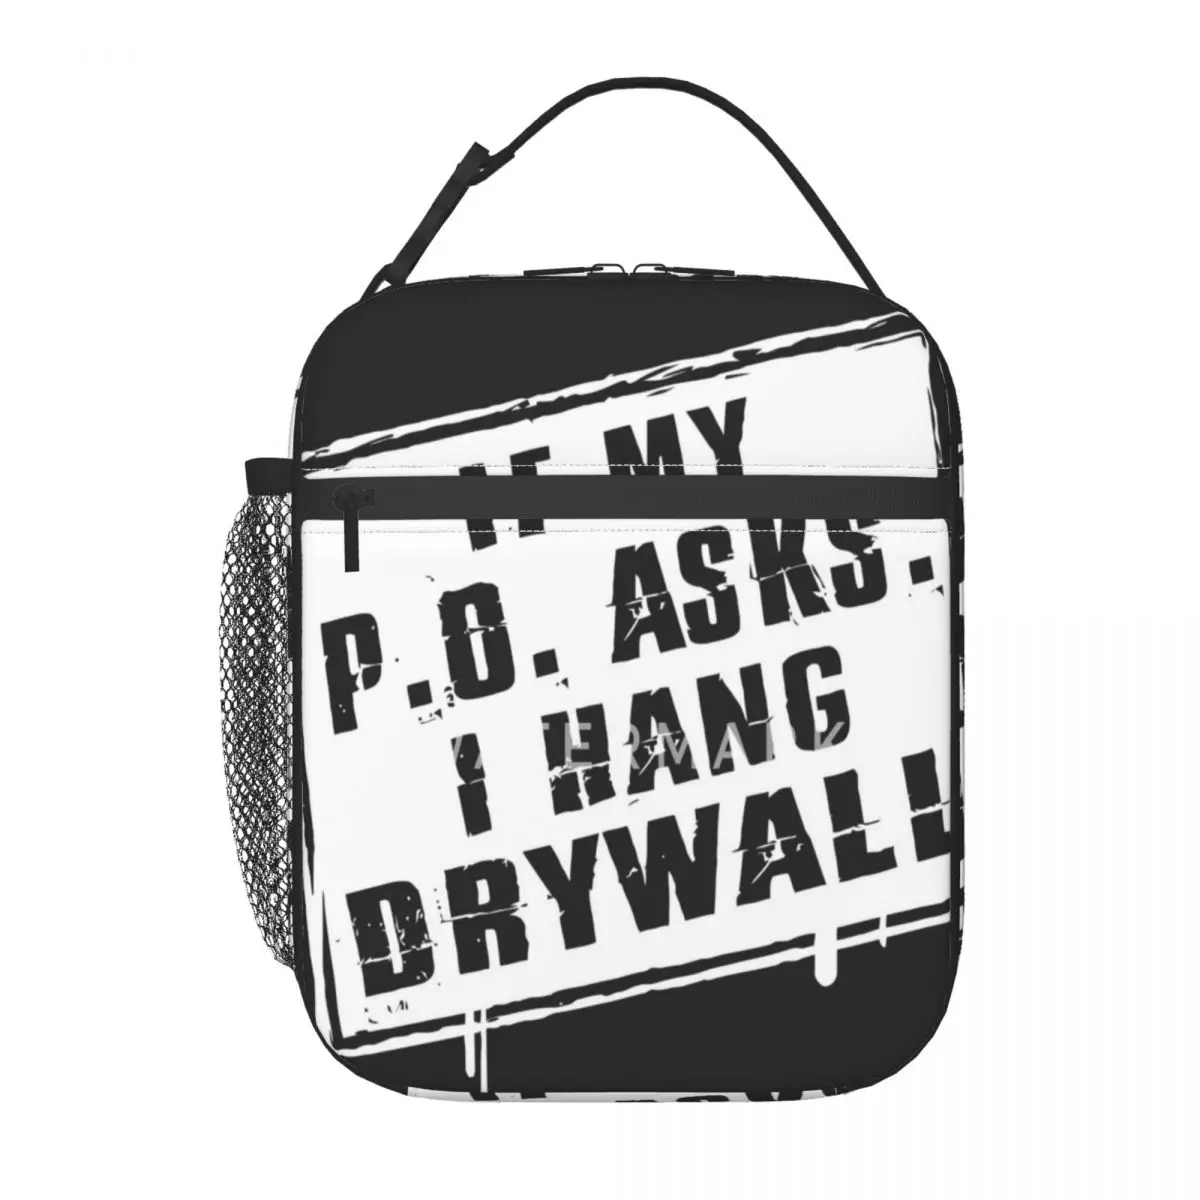 

Drywaller-if-my-p-o-asks-i-hang-drywall Lunch Bag Personalized Portable Daily Birthday Gift Customizable